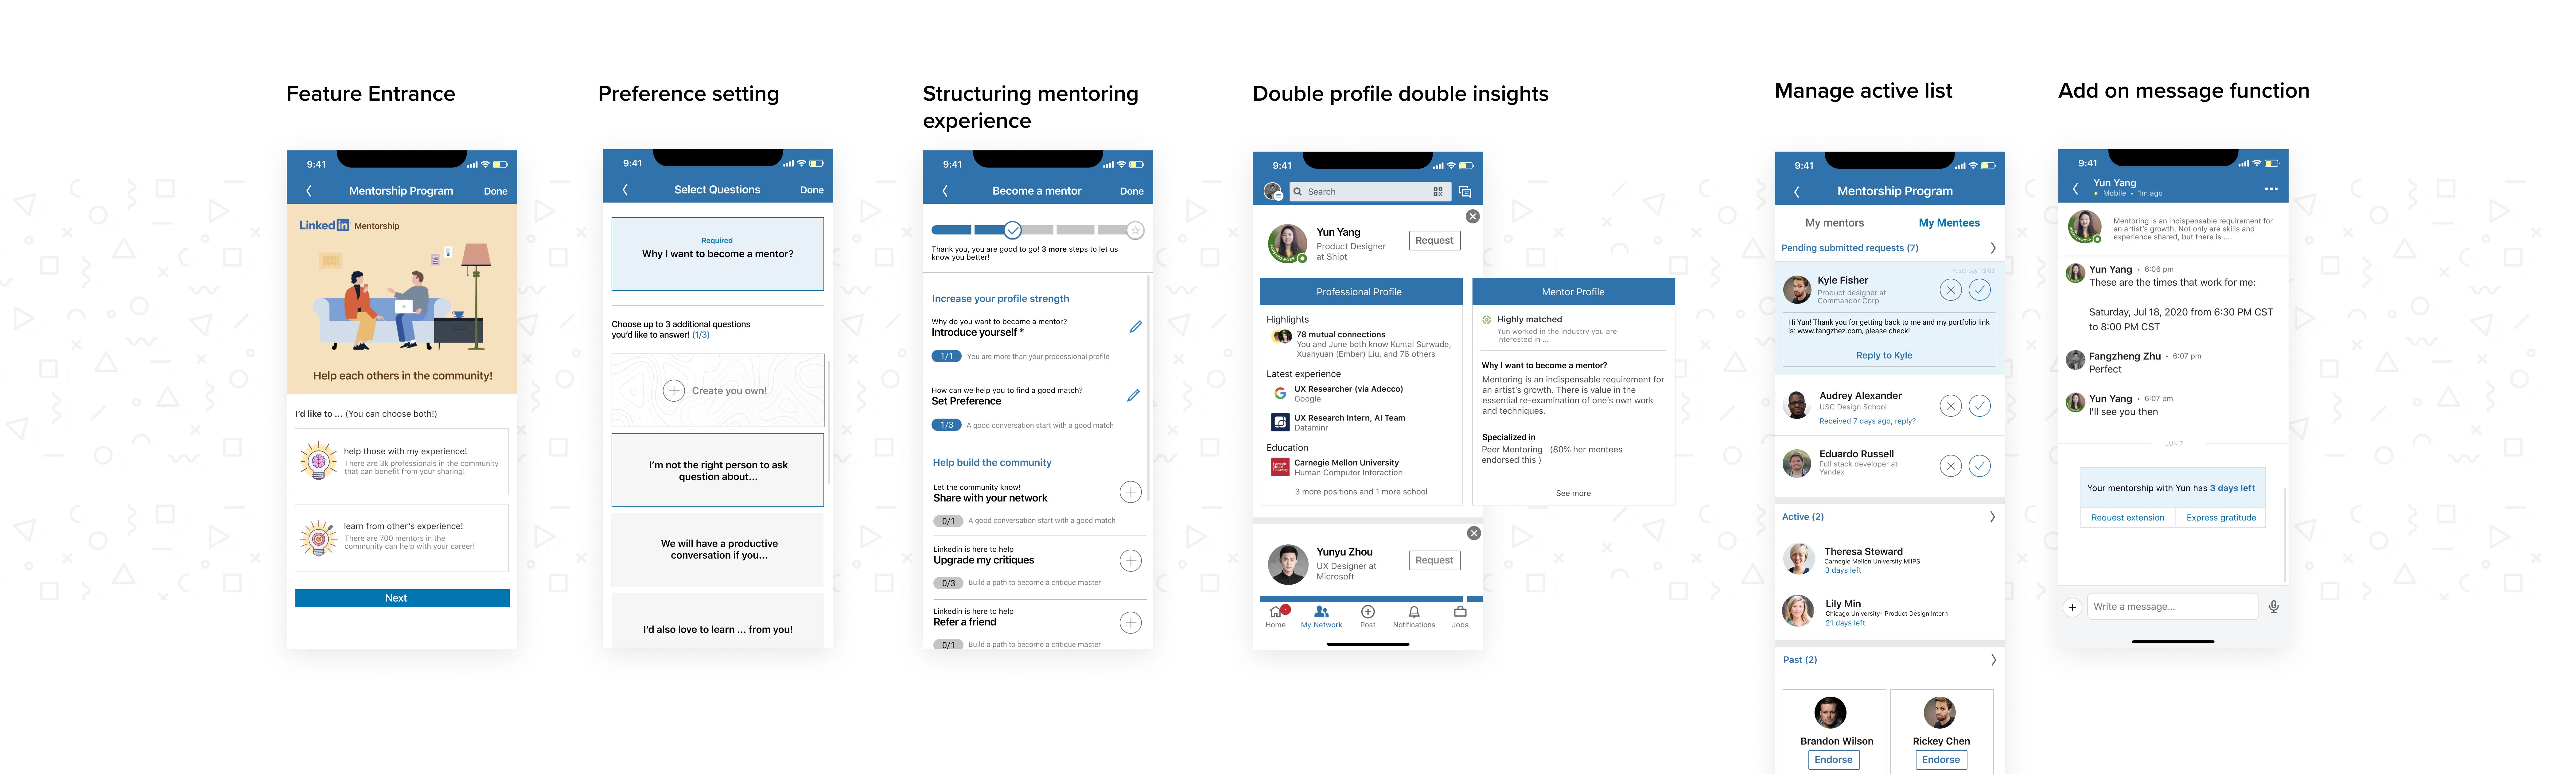 Grusom krølle cylinder Redesigning Linkedin's mentorship feature — a UX case study | by Yun Yang |  UX Collective